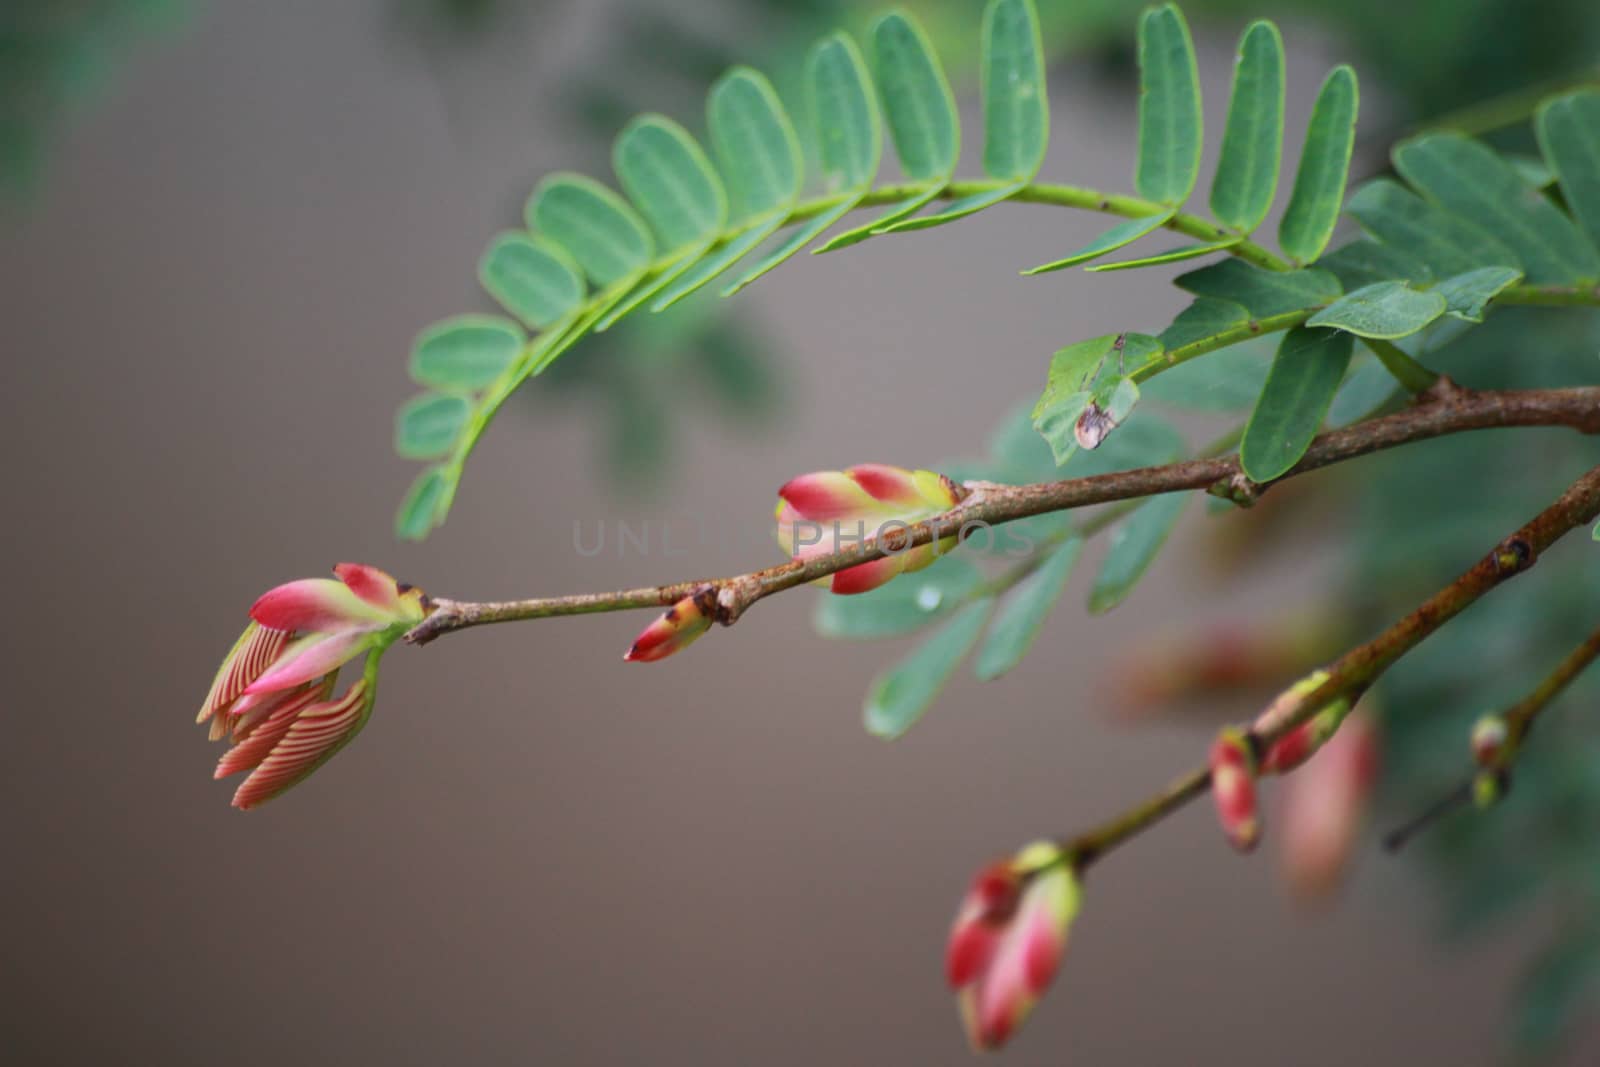 There are flowers of tamarind and tamarind leaves.